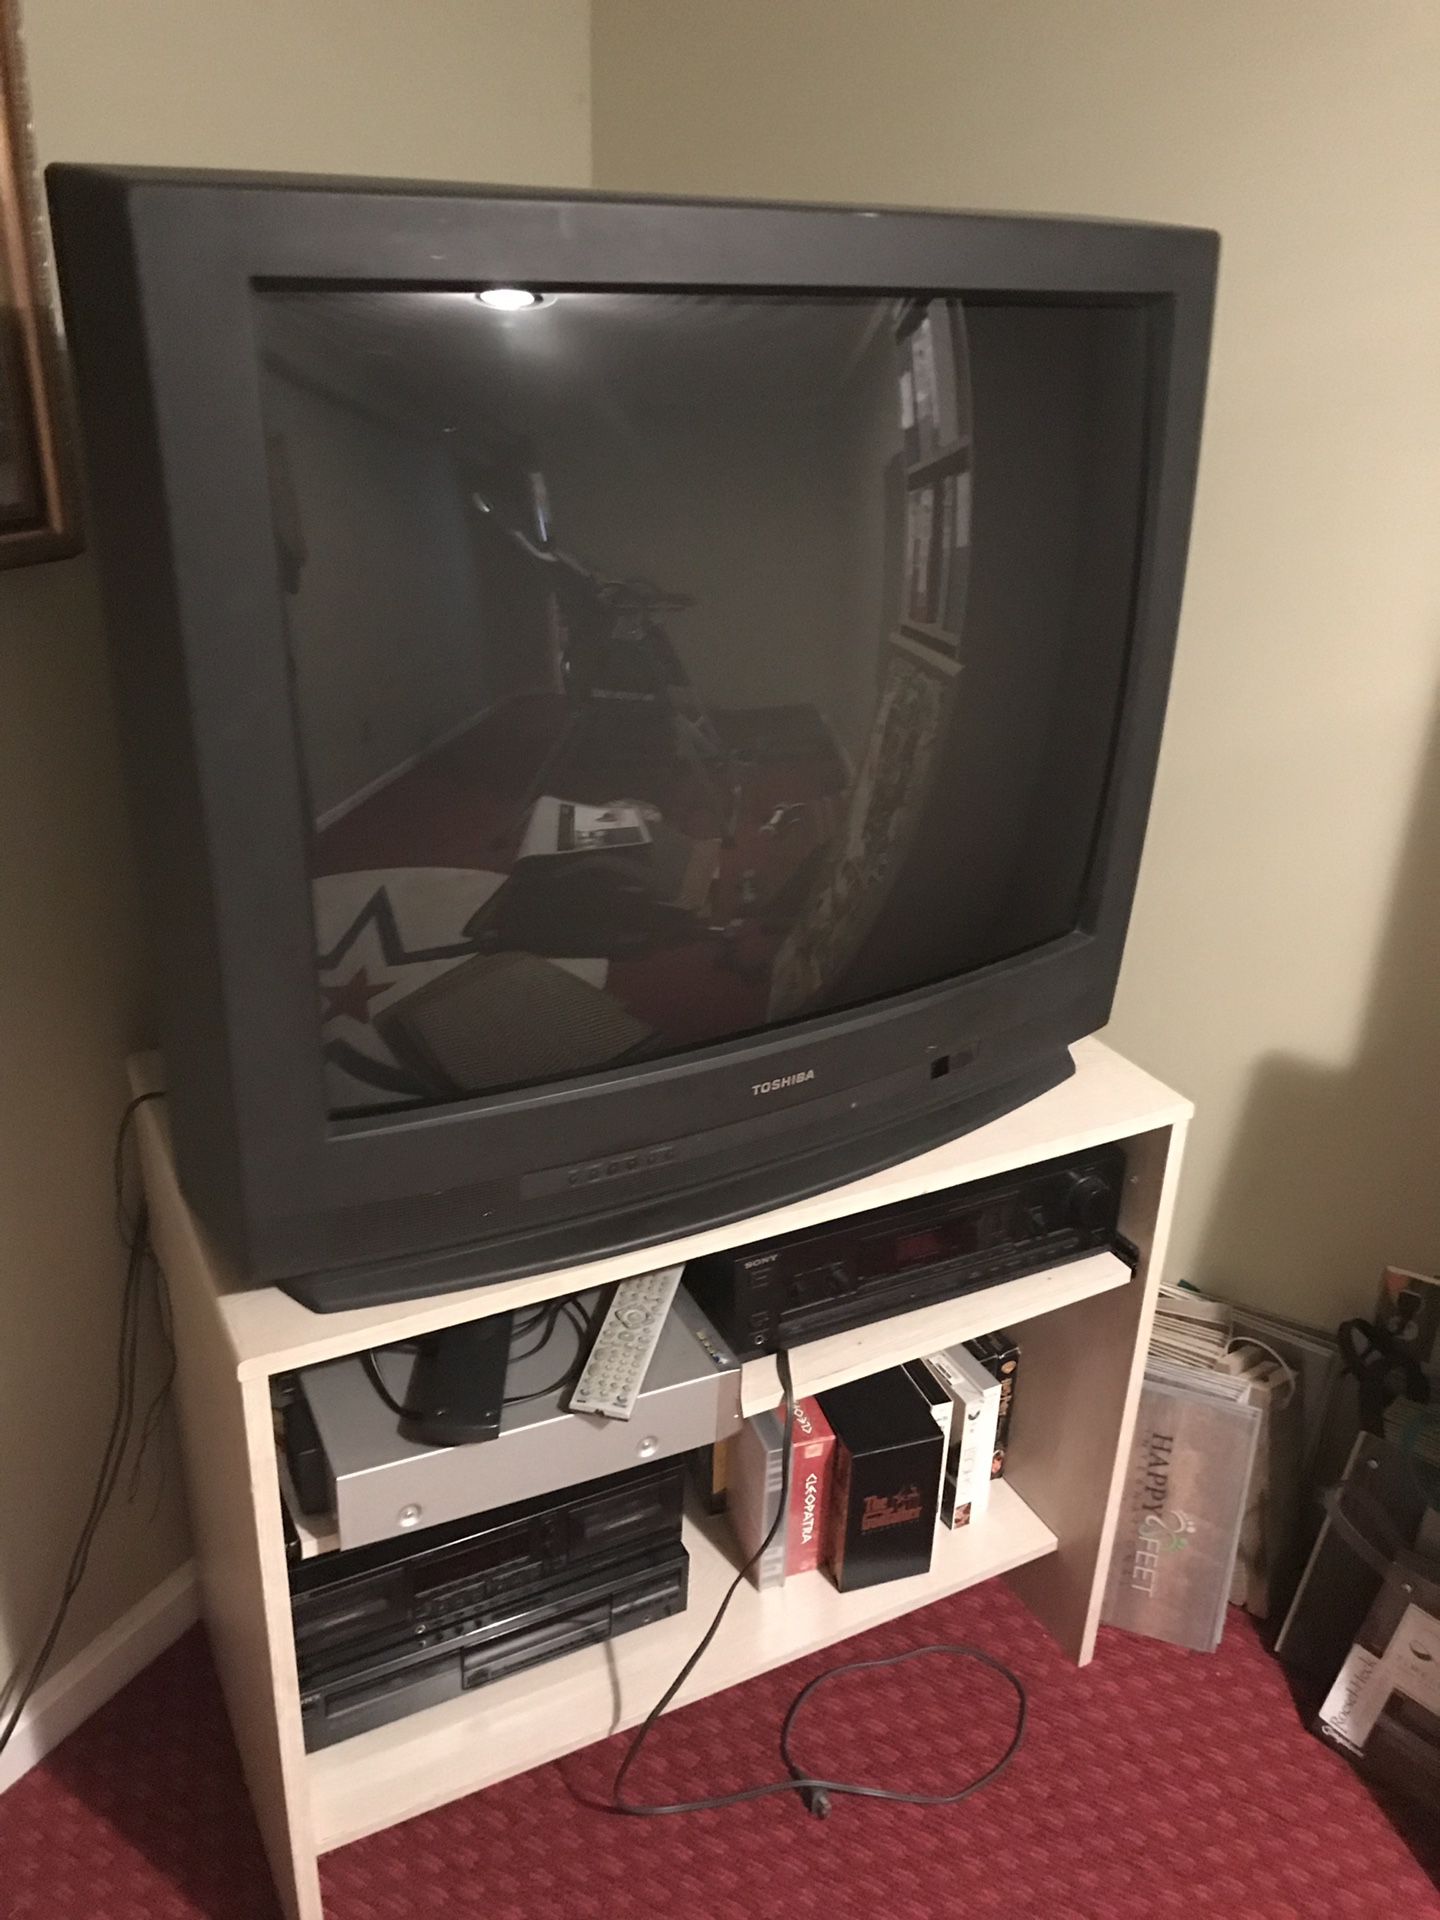 Toshiba 36 inch vintage TV with the stand both together the stand has a moving shelf for many different uses